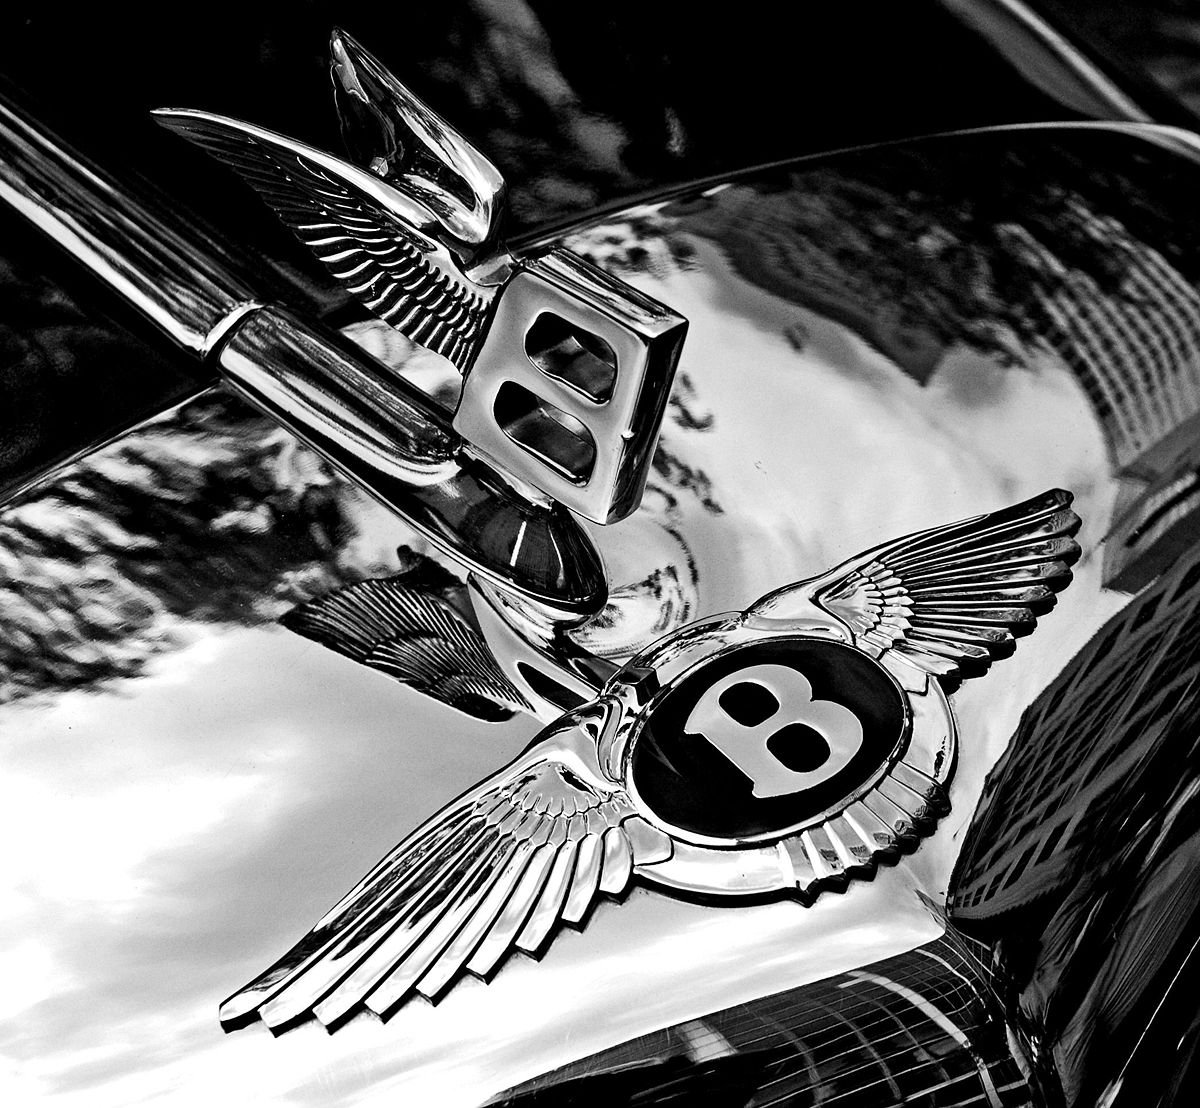 1200px-bentley_badge_and_hood_ornament-bw